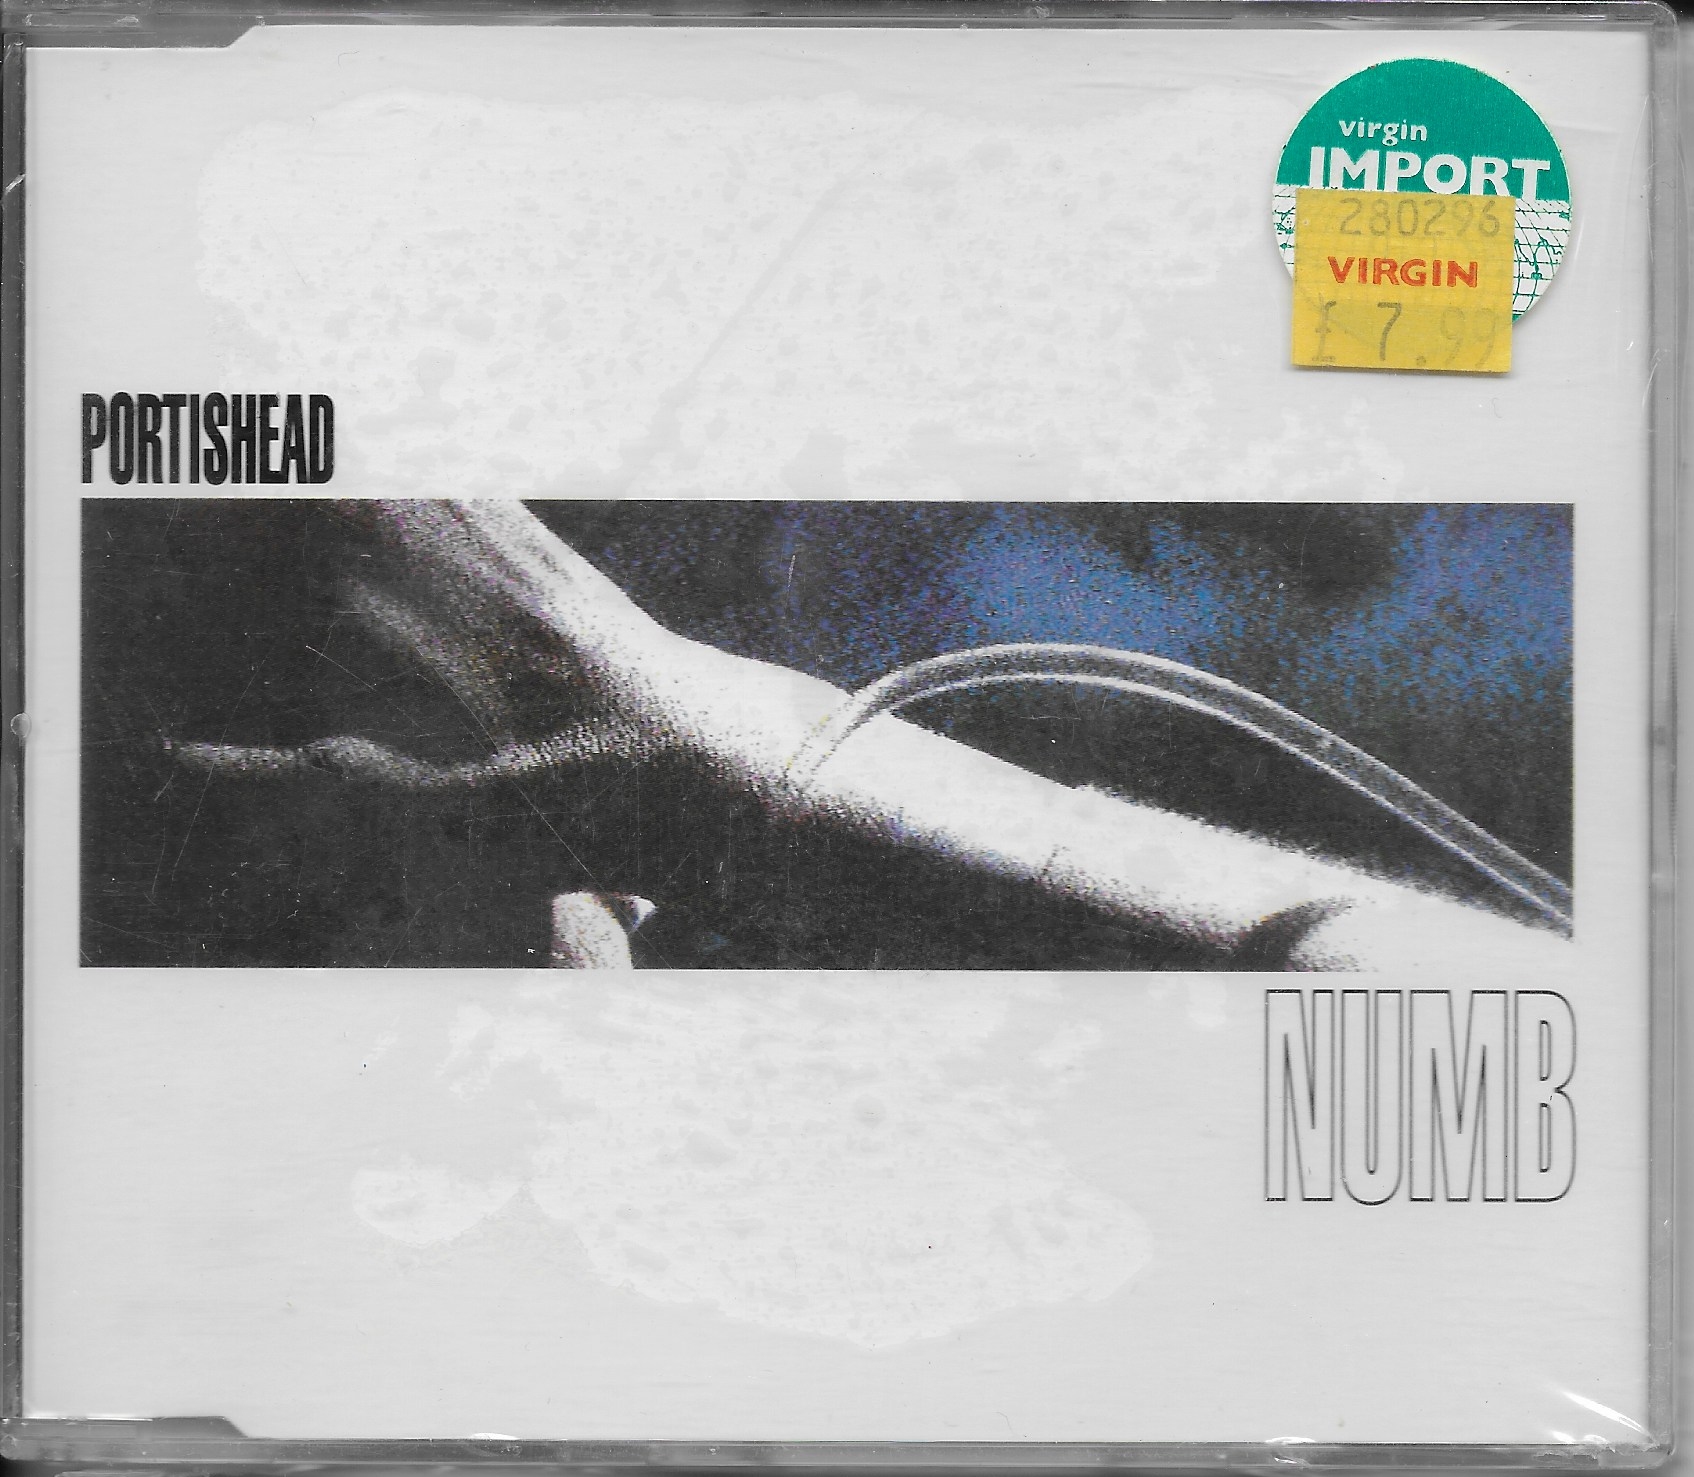 Picture of Numb by artist Portishead  